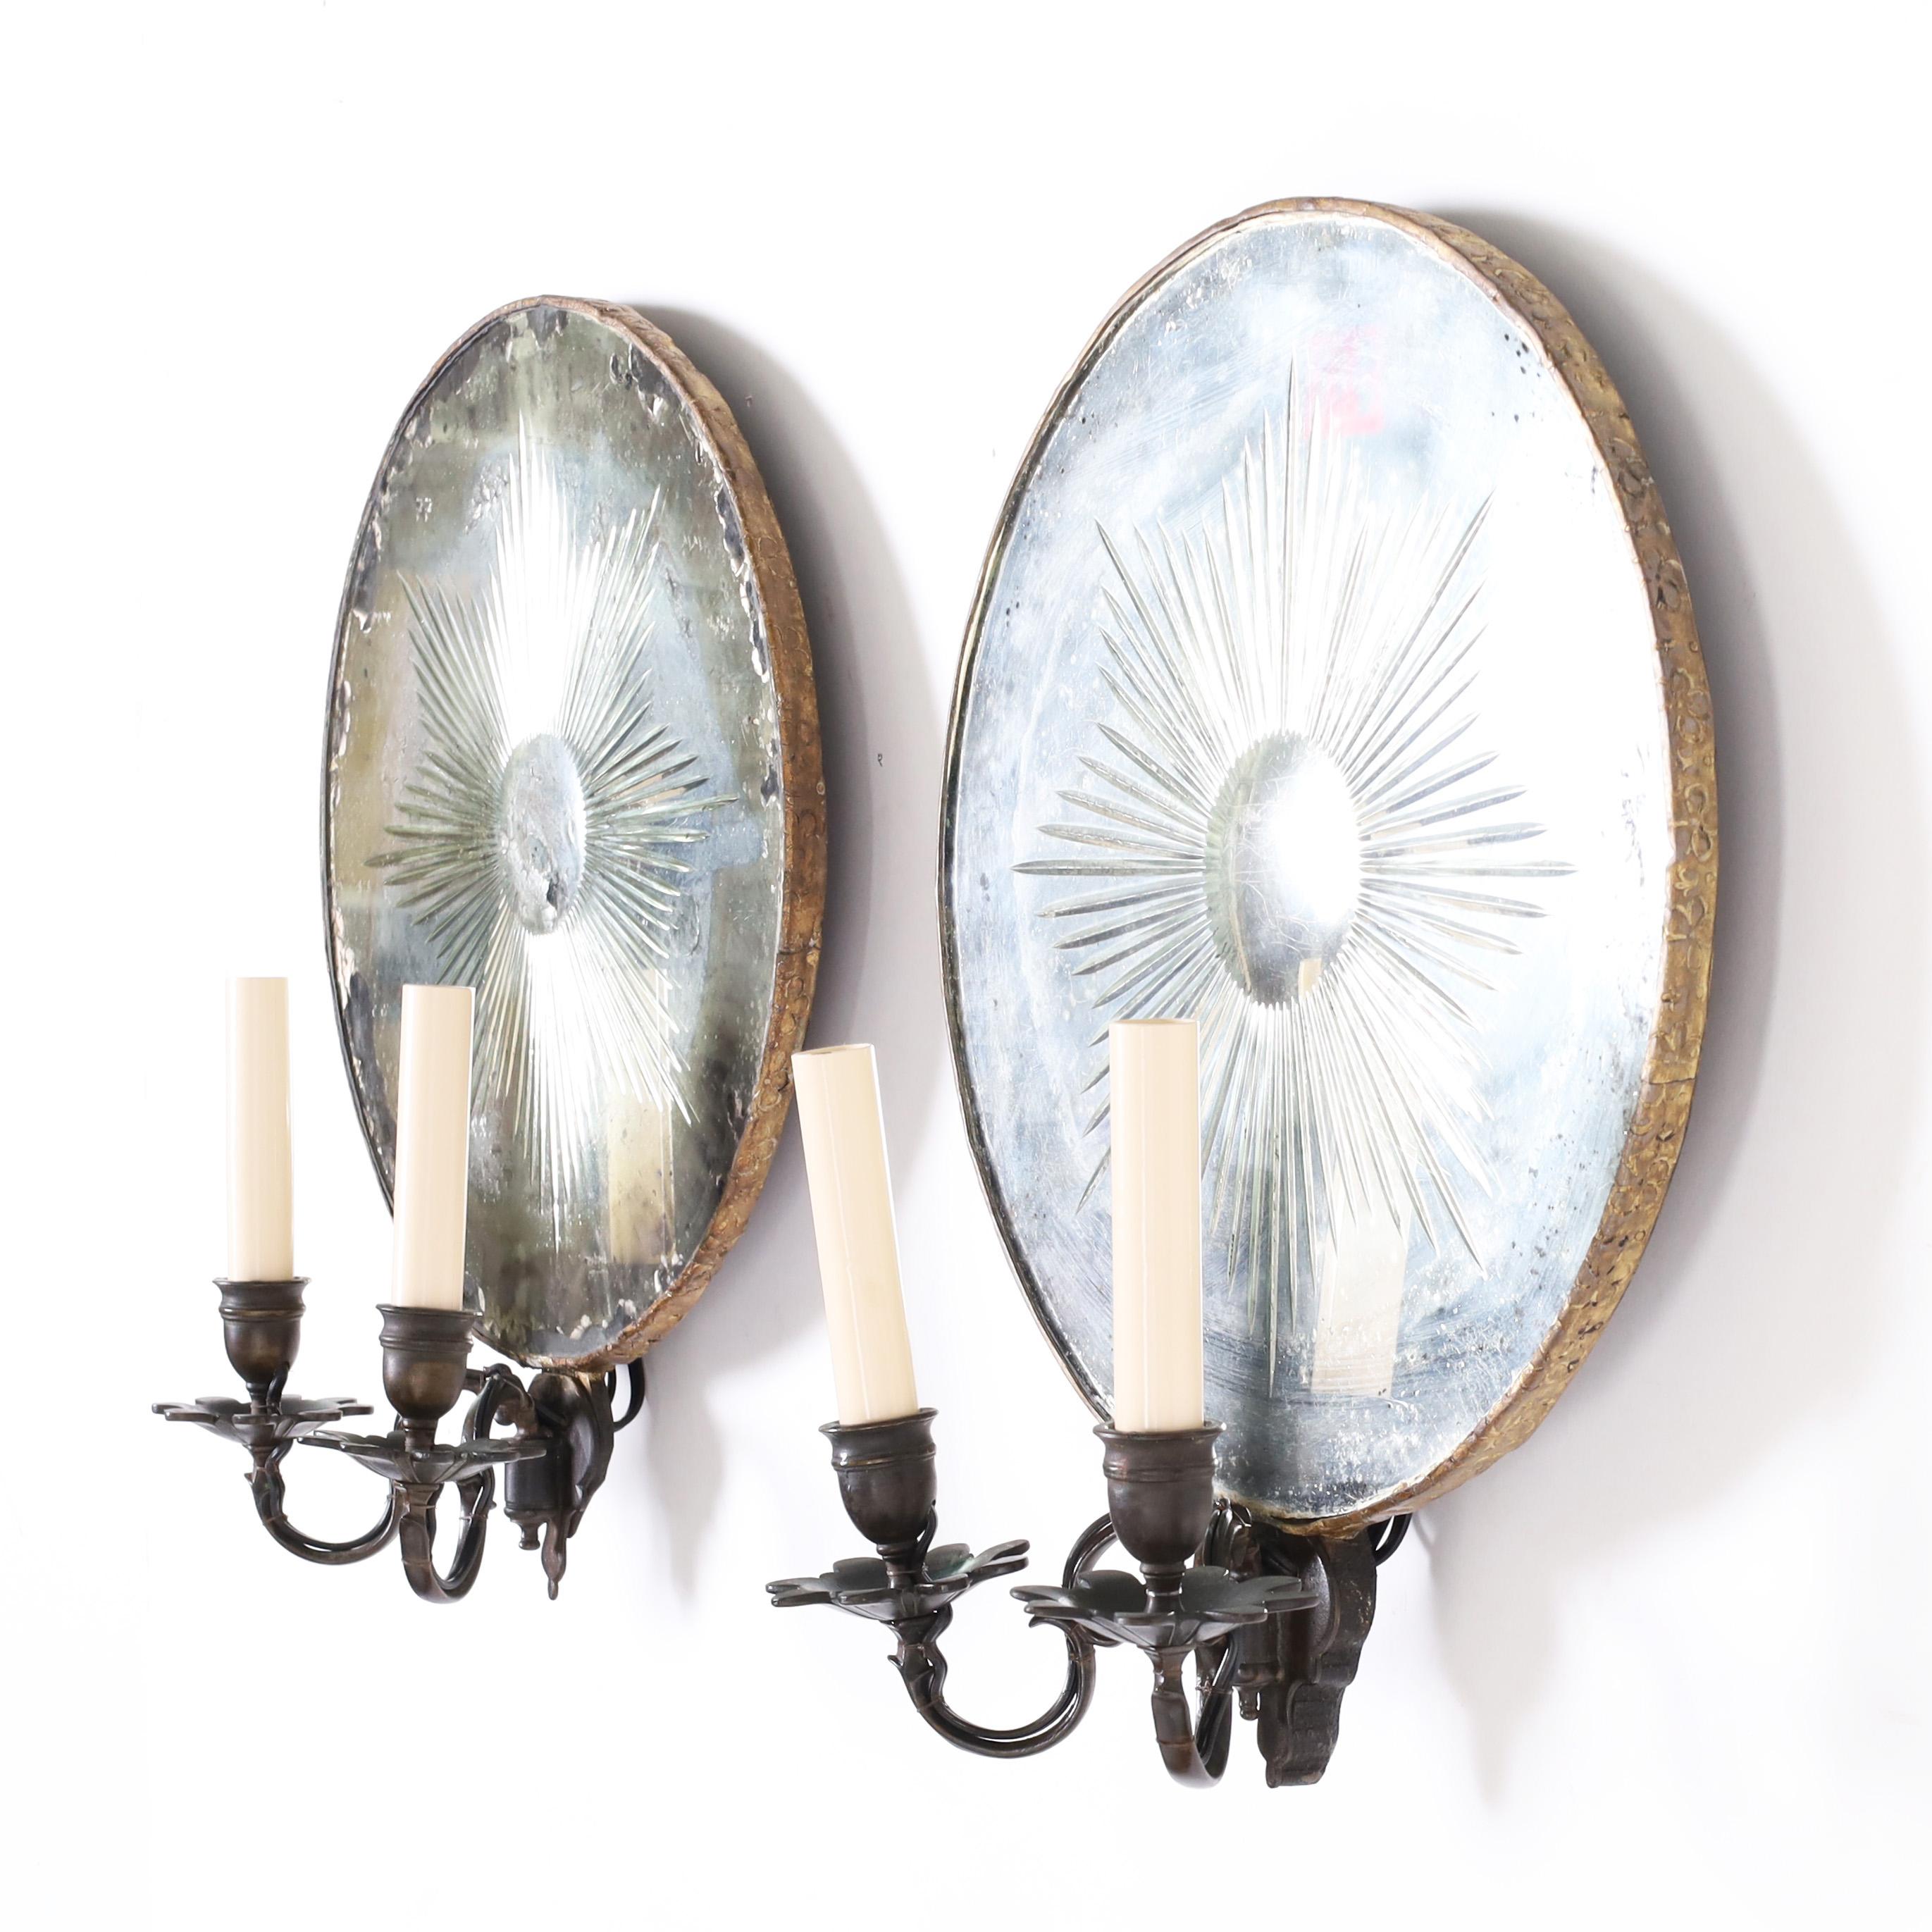 Lofty pair of 19th Century two light wall sconces, later electrified, featuring distressed mirrored backs with cut sun ray designs in a brass frame and graceful bronze floral arms and cups.